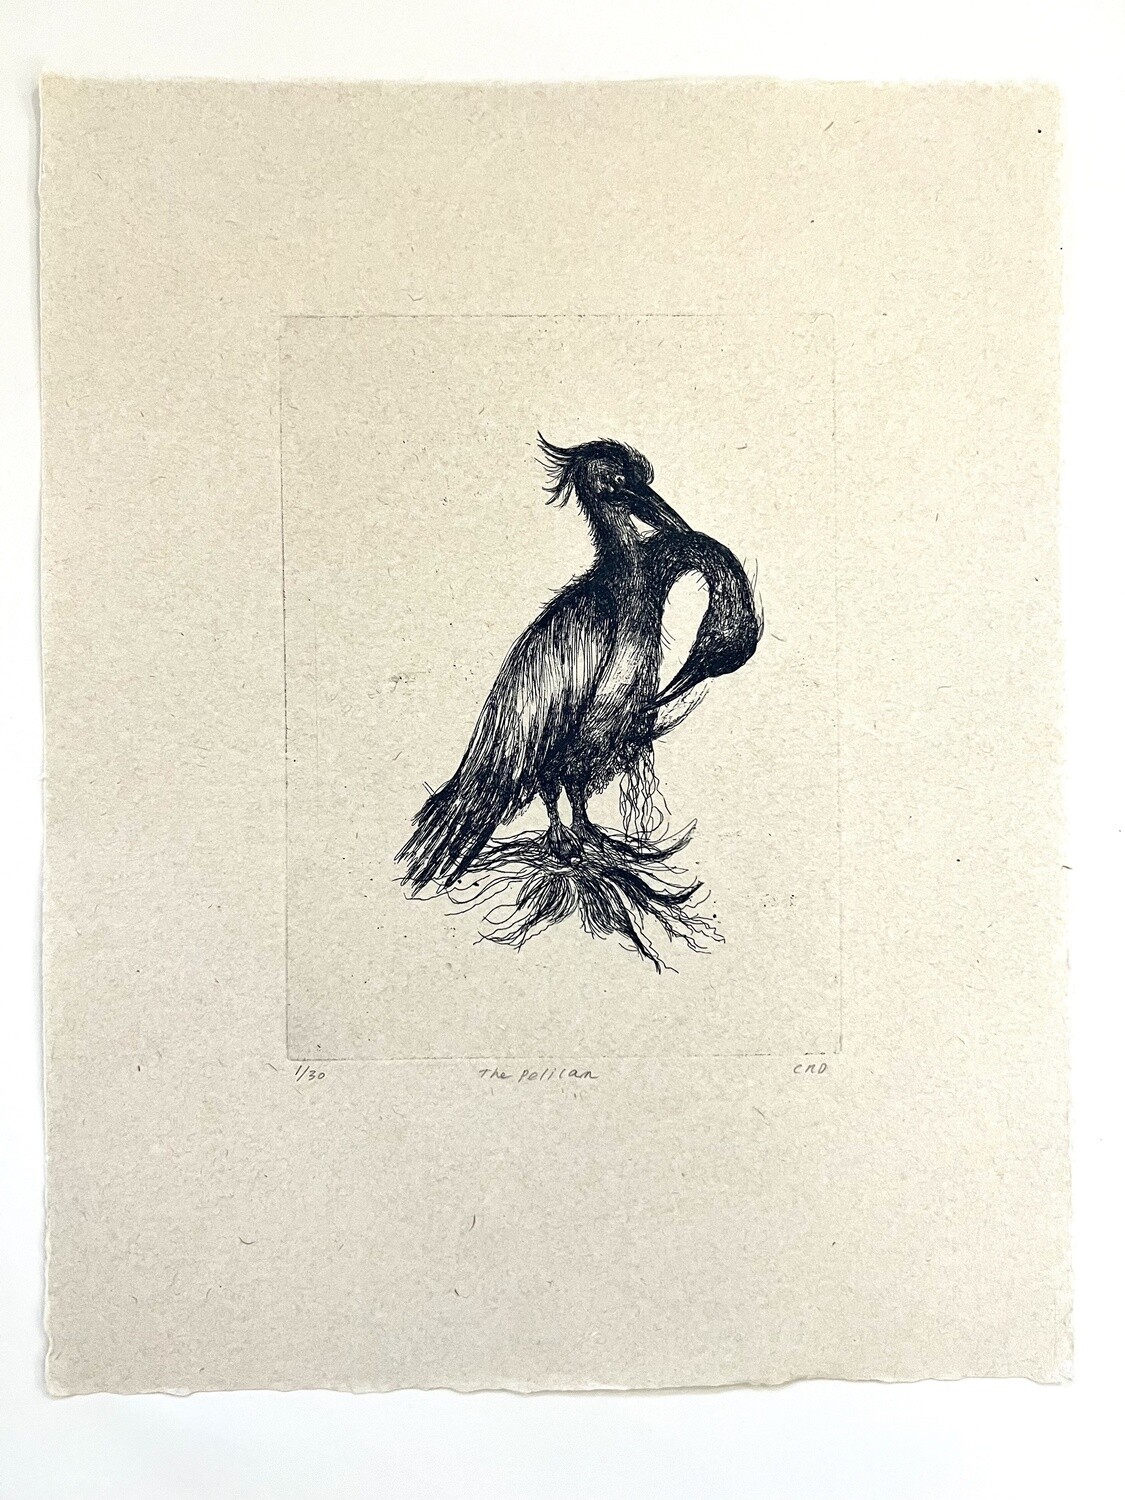 The Pelican - Etching